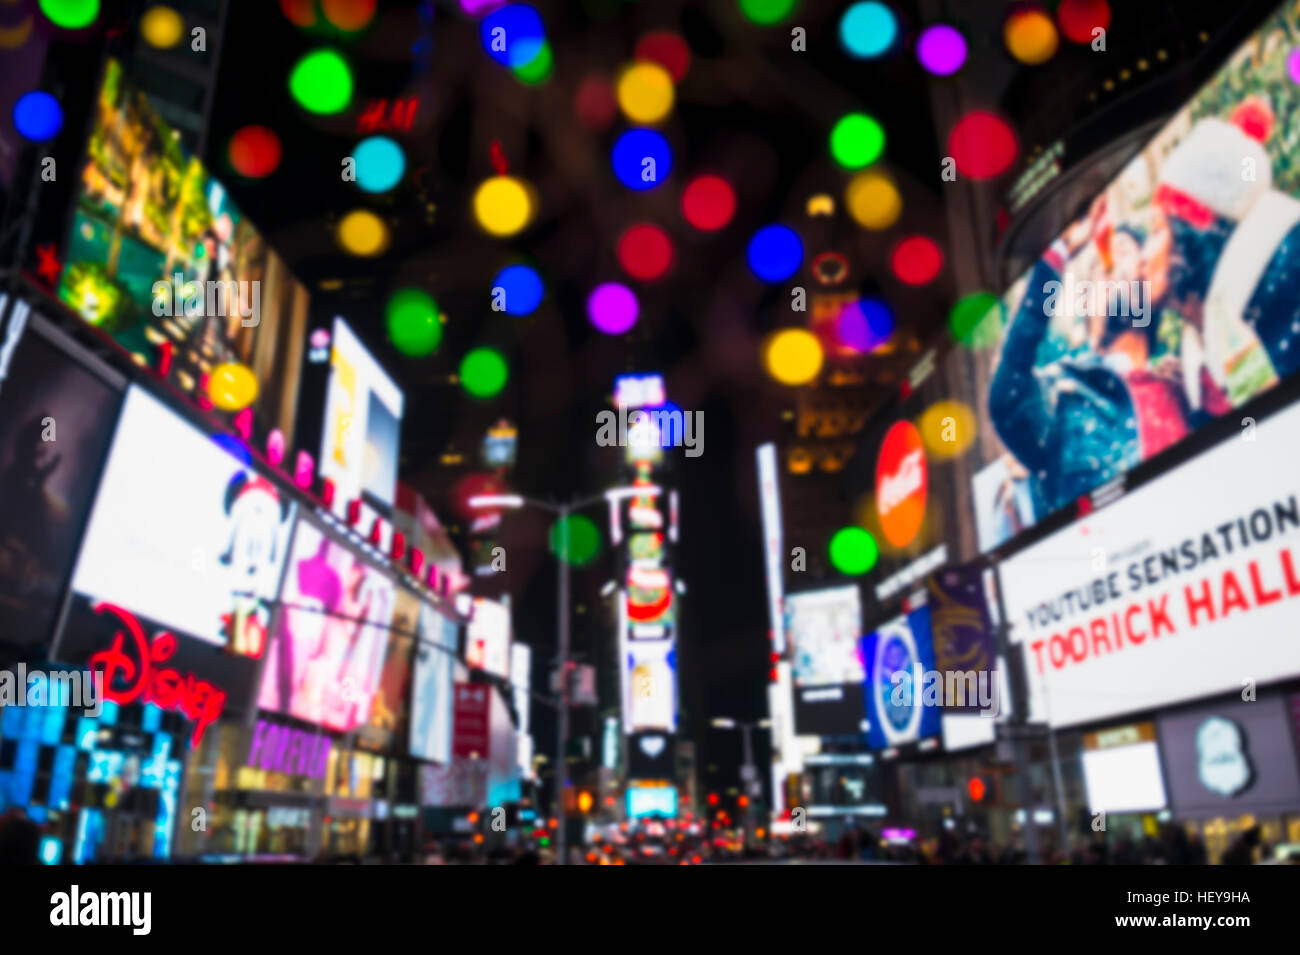 NEW YORK CITY - DECEMBER 23, 2016: Colorful lights decorate Times Square as the city prepares for New Year's Eve celebrations. Stock Photo